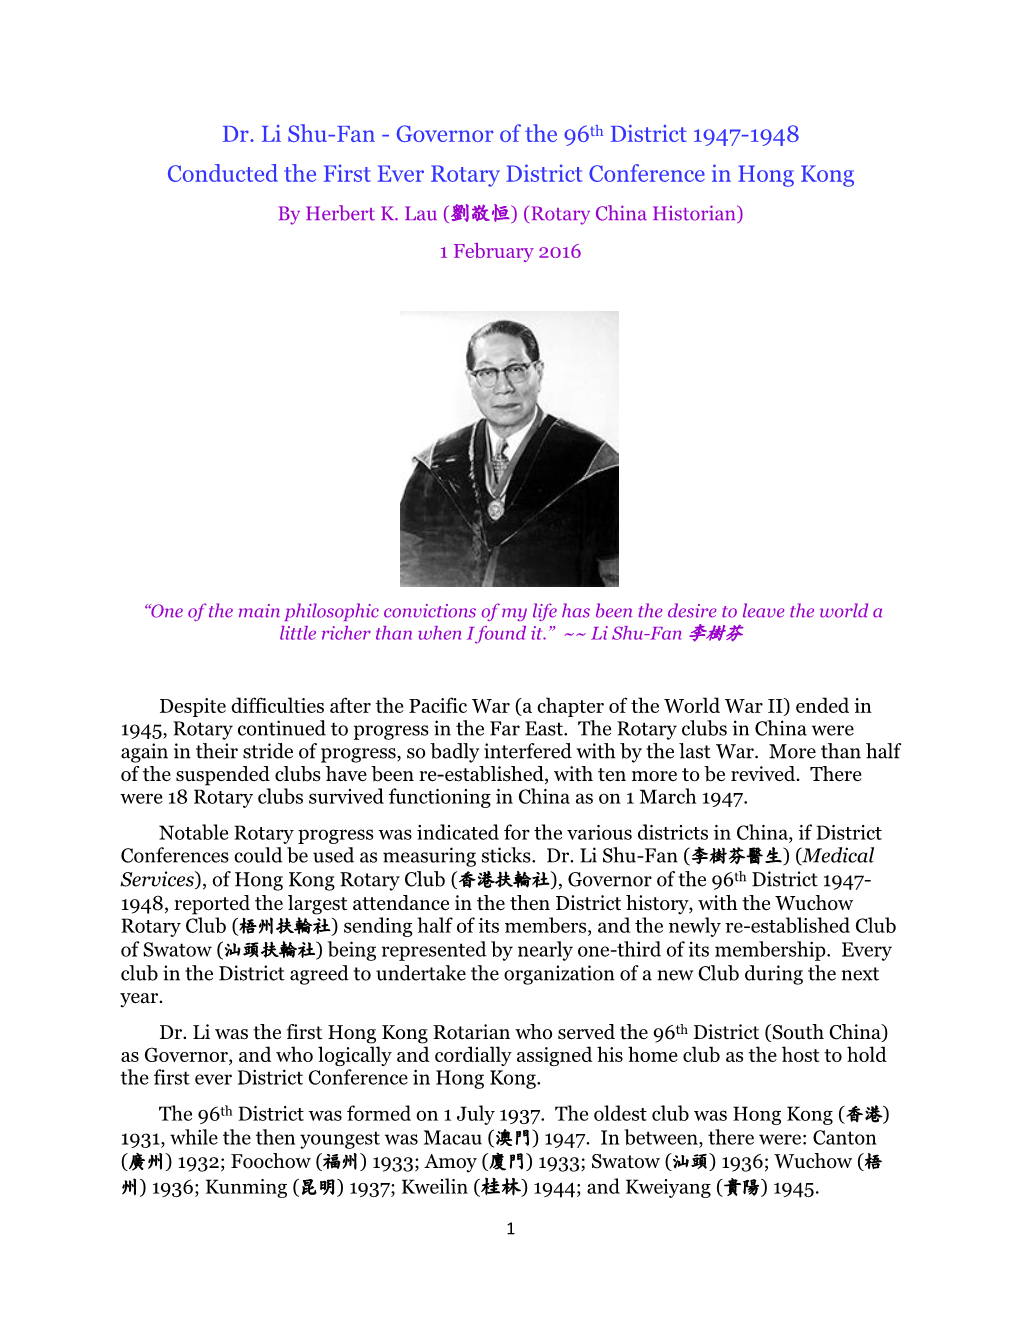 Dr. Li Shu-Fan - Governor of the 96Th District 1947-1948 Conducted the First Ever Rotary District Conference in Hong Kong by Herbert K